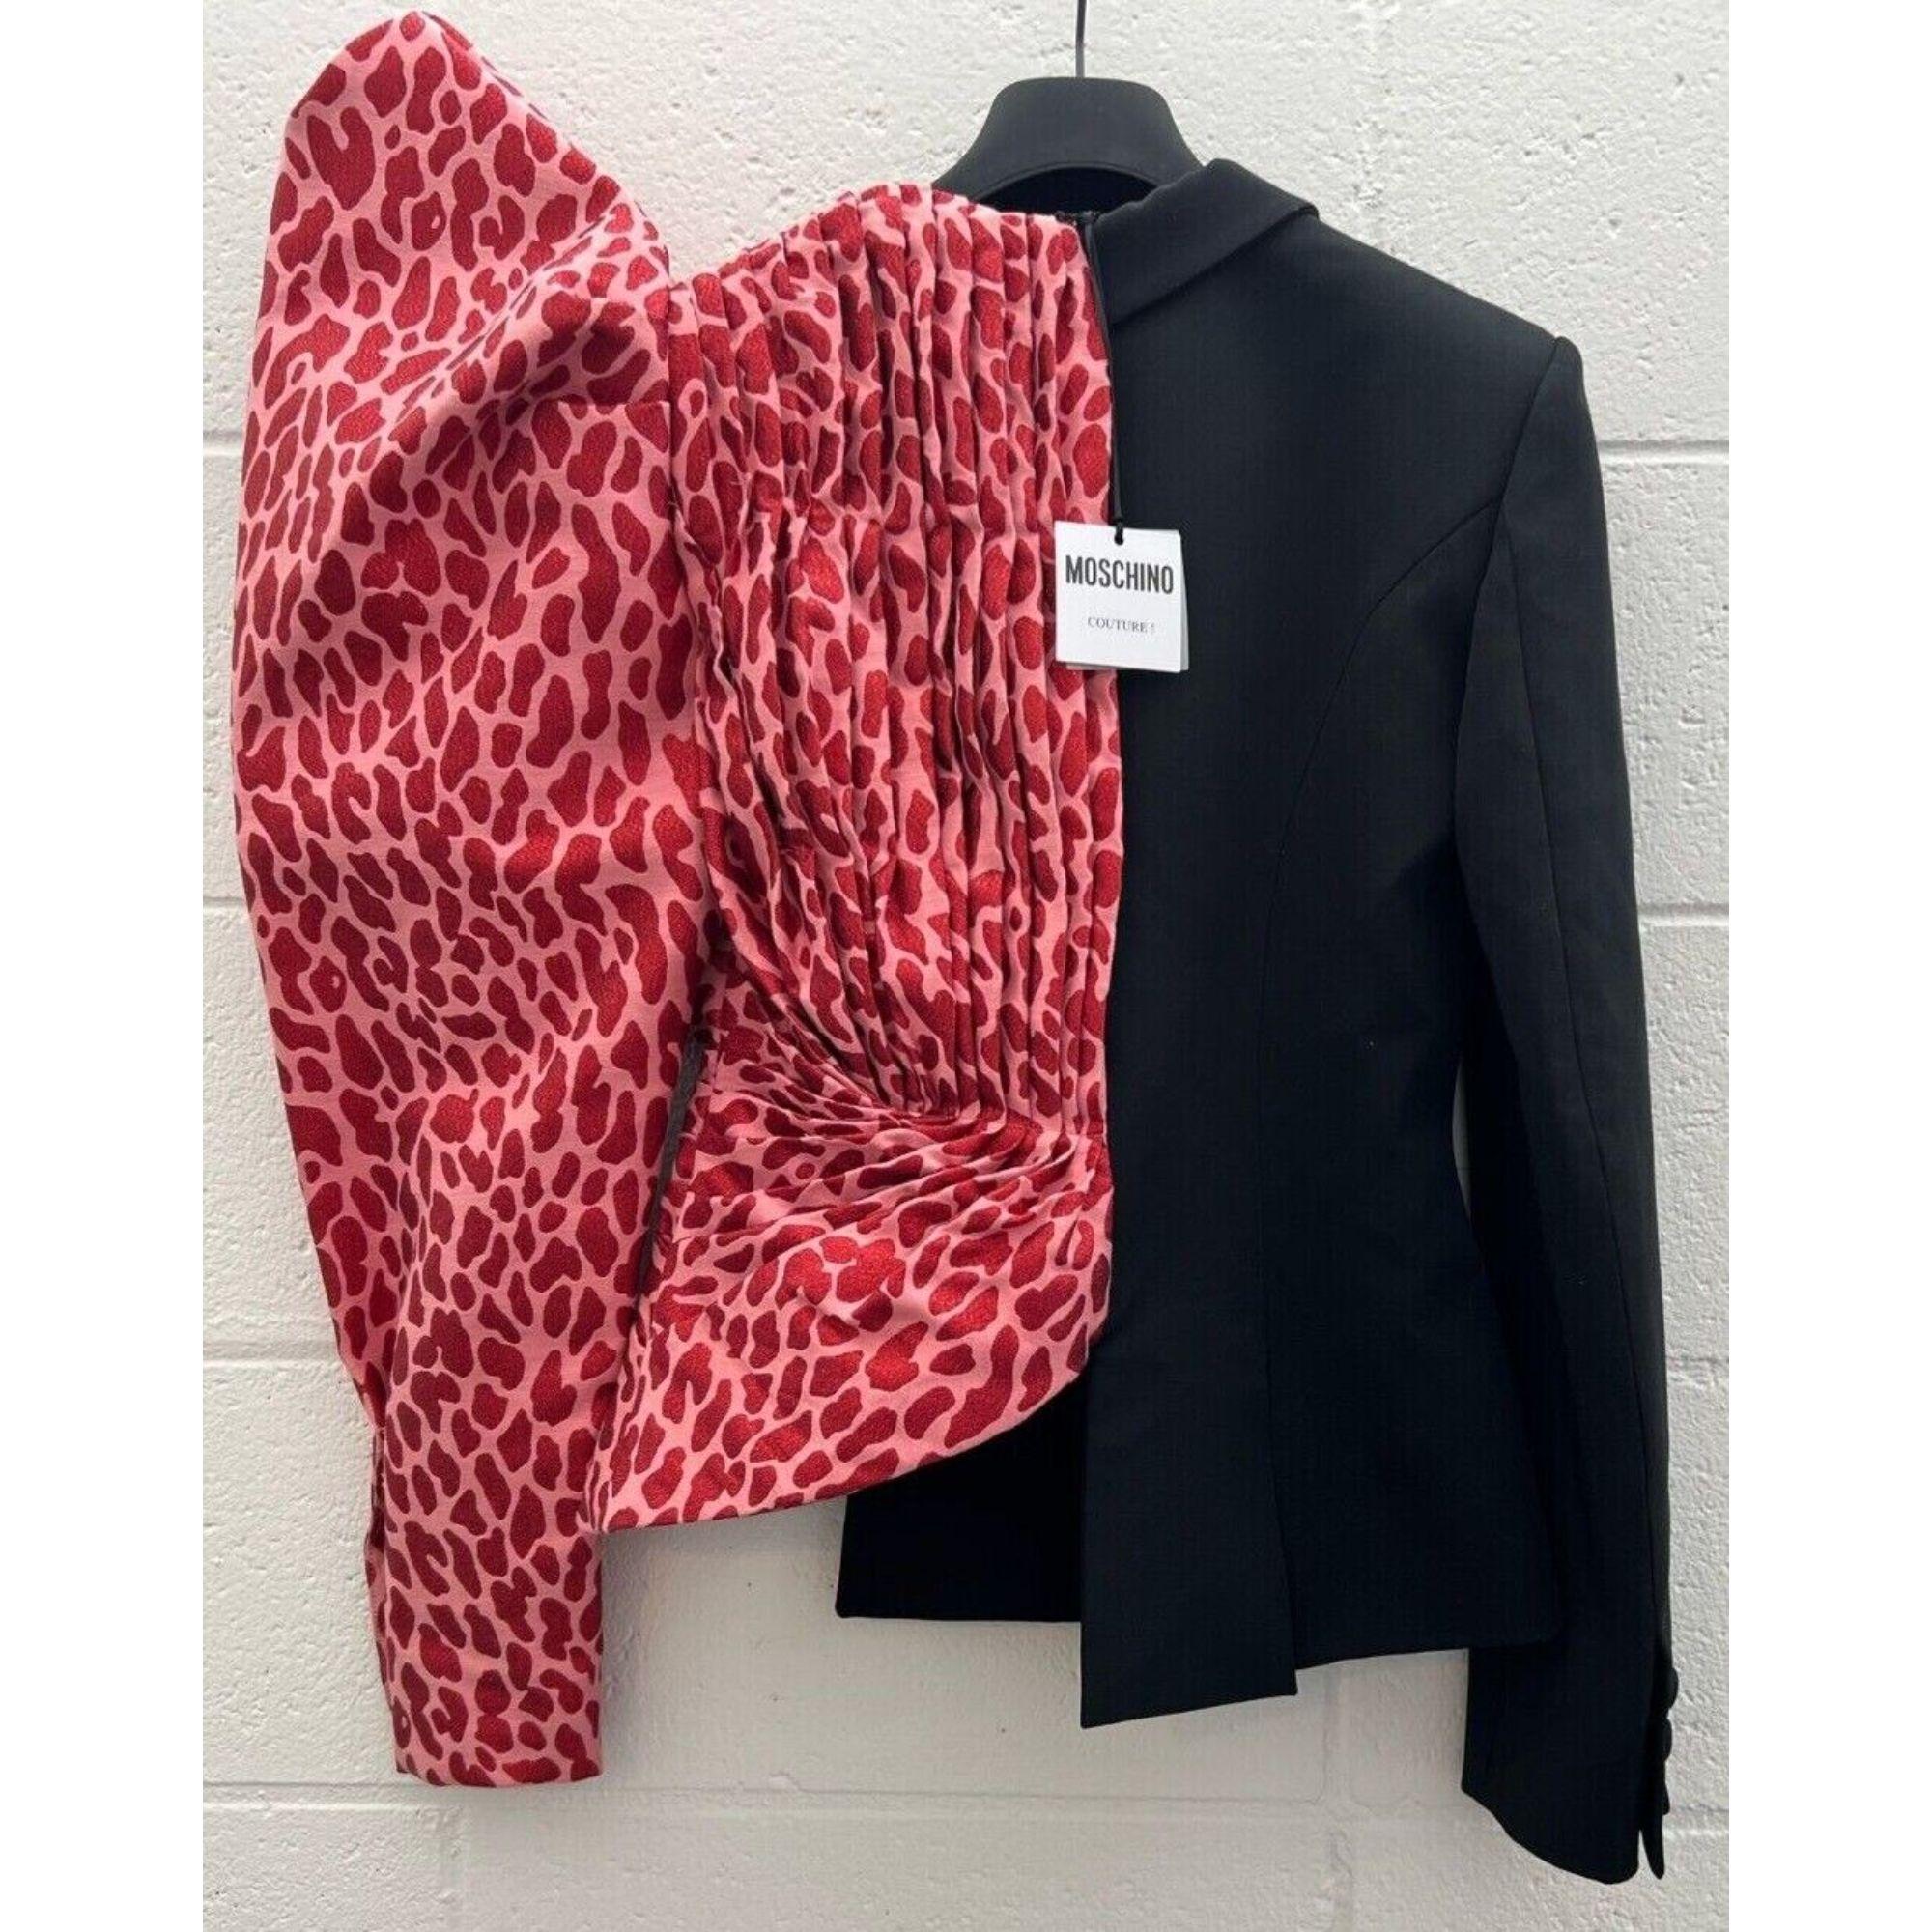 AW21 Moschino Couture Jacket Half Black Half Pink Leopard Spots by Jeremy Scott For Sale 4